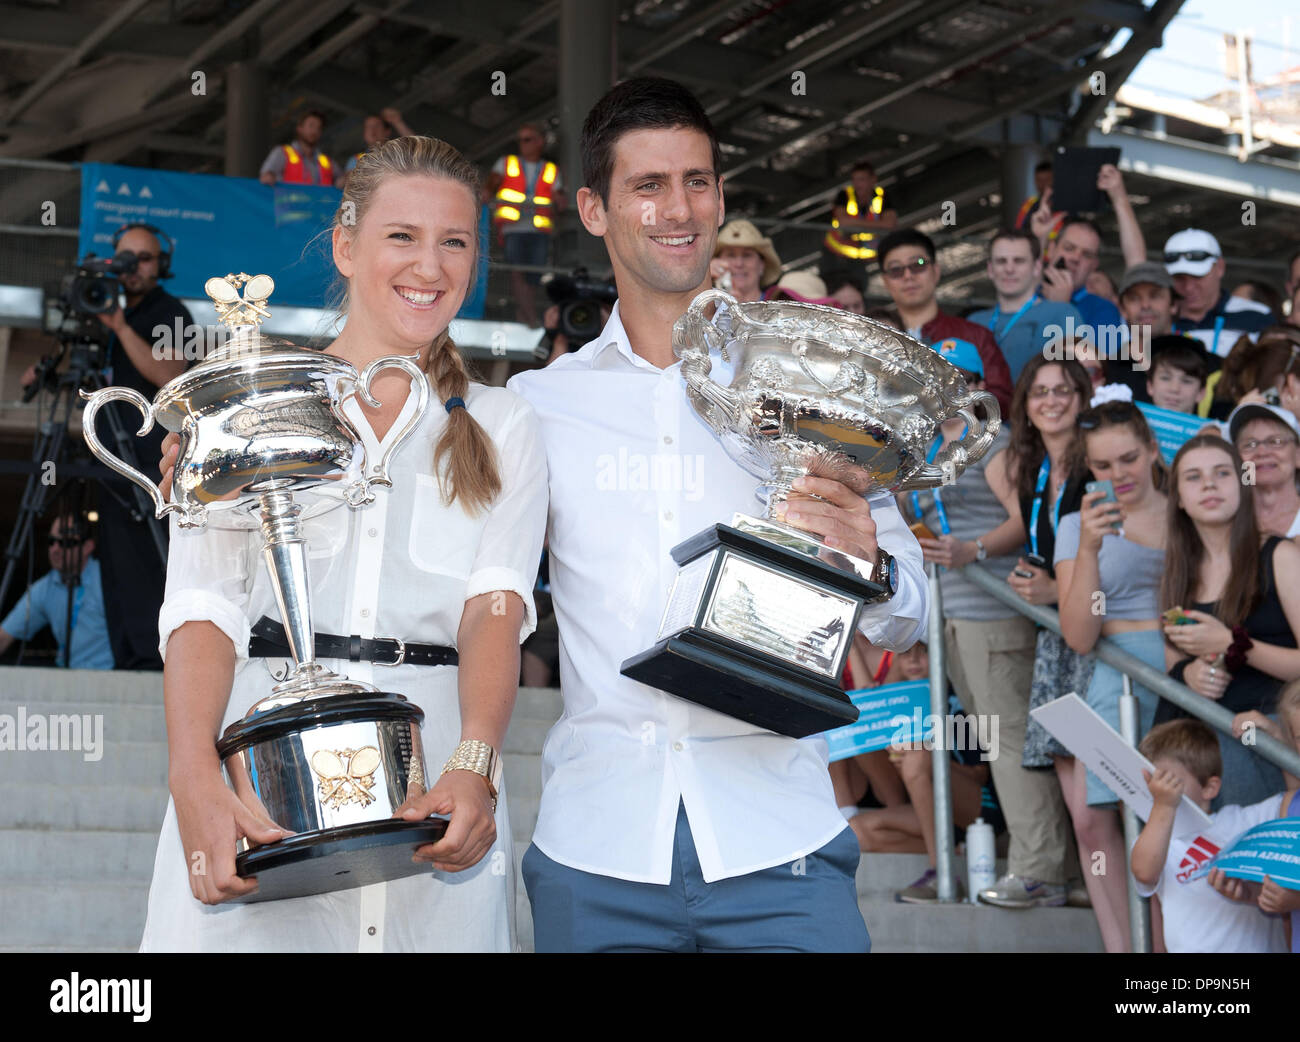 Melbourne, Australia. 10th Jan, 2014. Defending champions Victoria Azarenka (L) of and Novak Djokovic of Serbia pose with trophies prior to the official of the Australian Open tennis championship